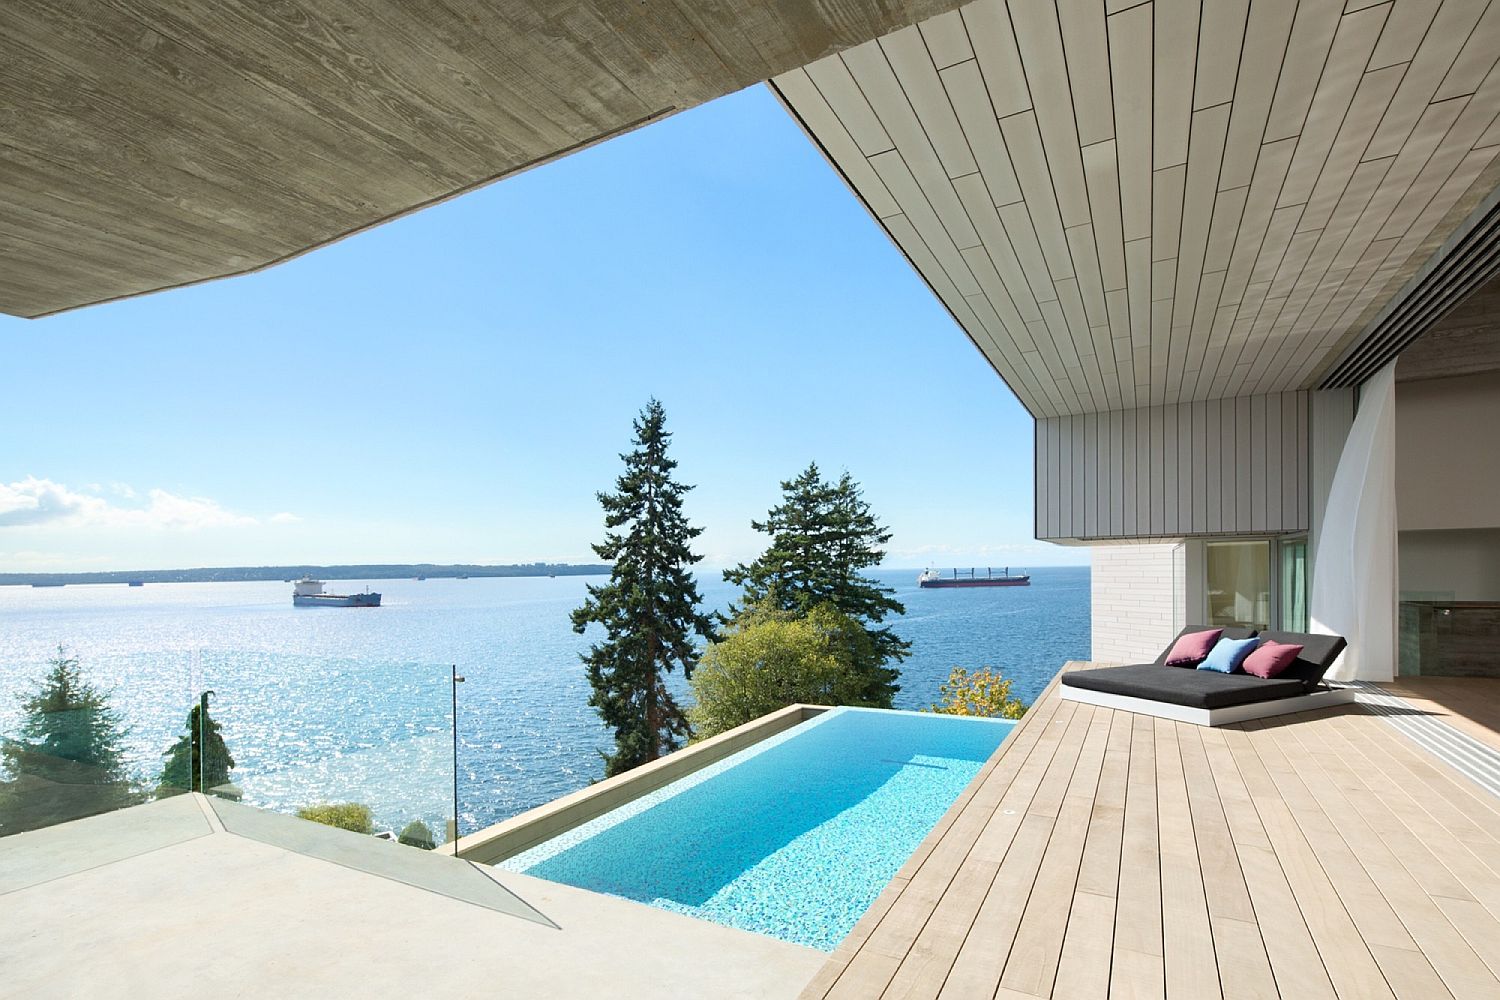 Fabulous-ocean-views-from-the-suspended-deck-and-plunge-pool-at-the-Vancouver-home